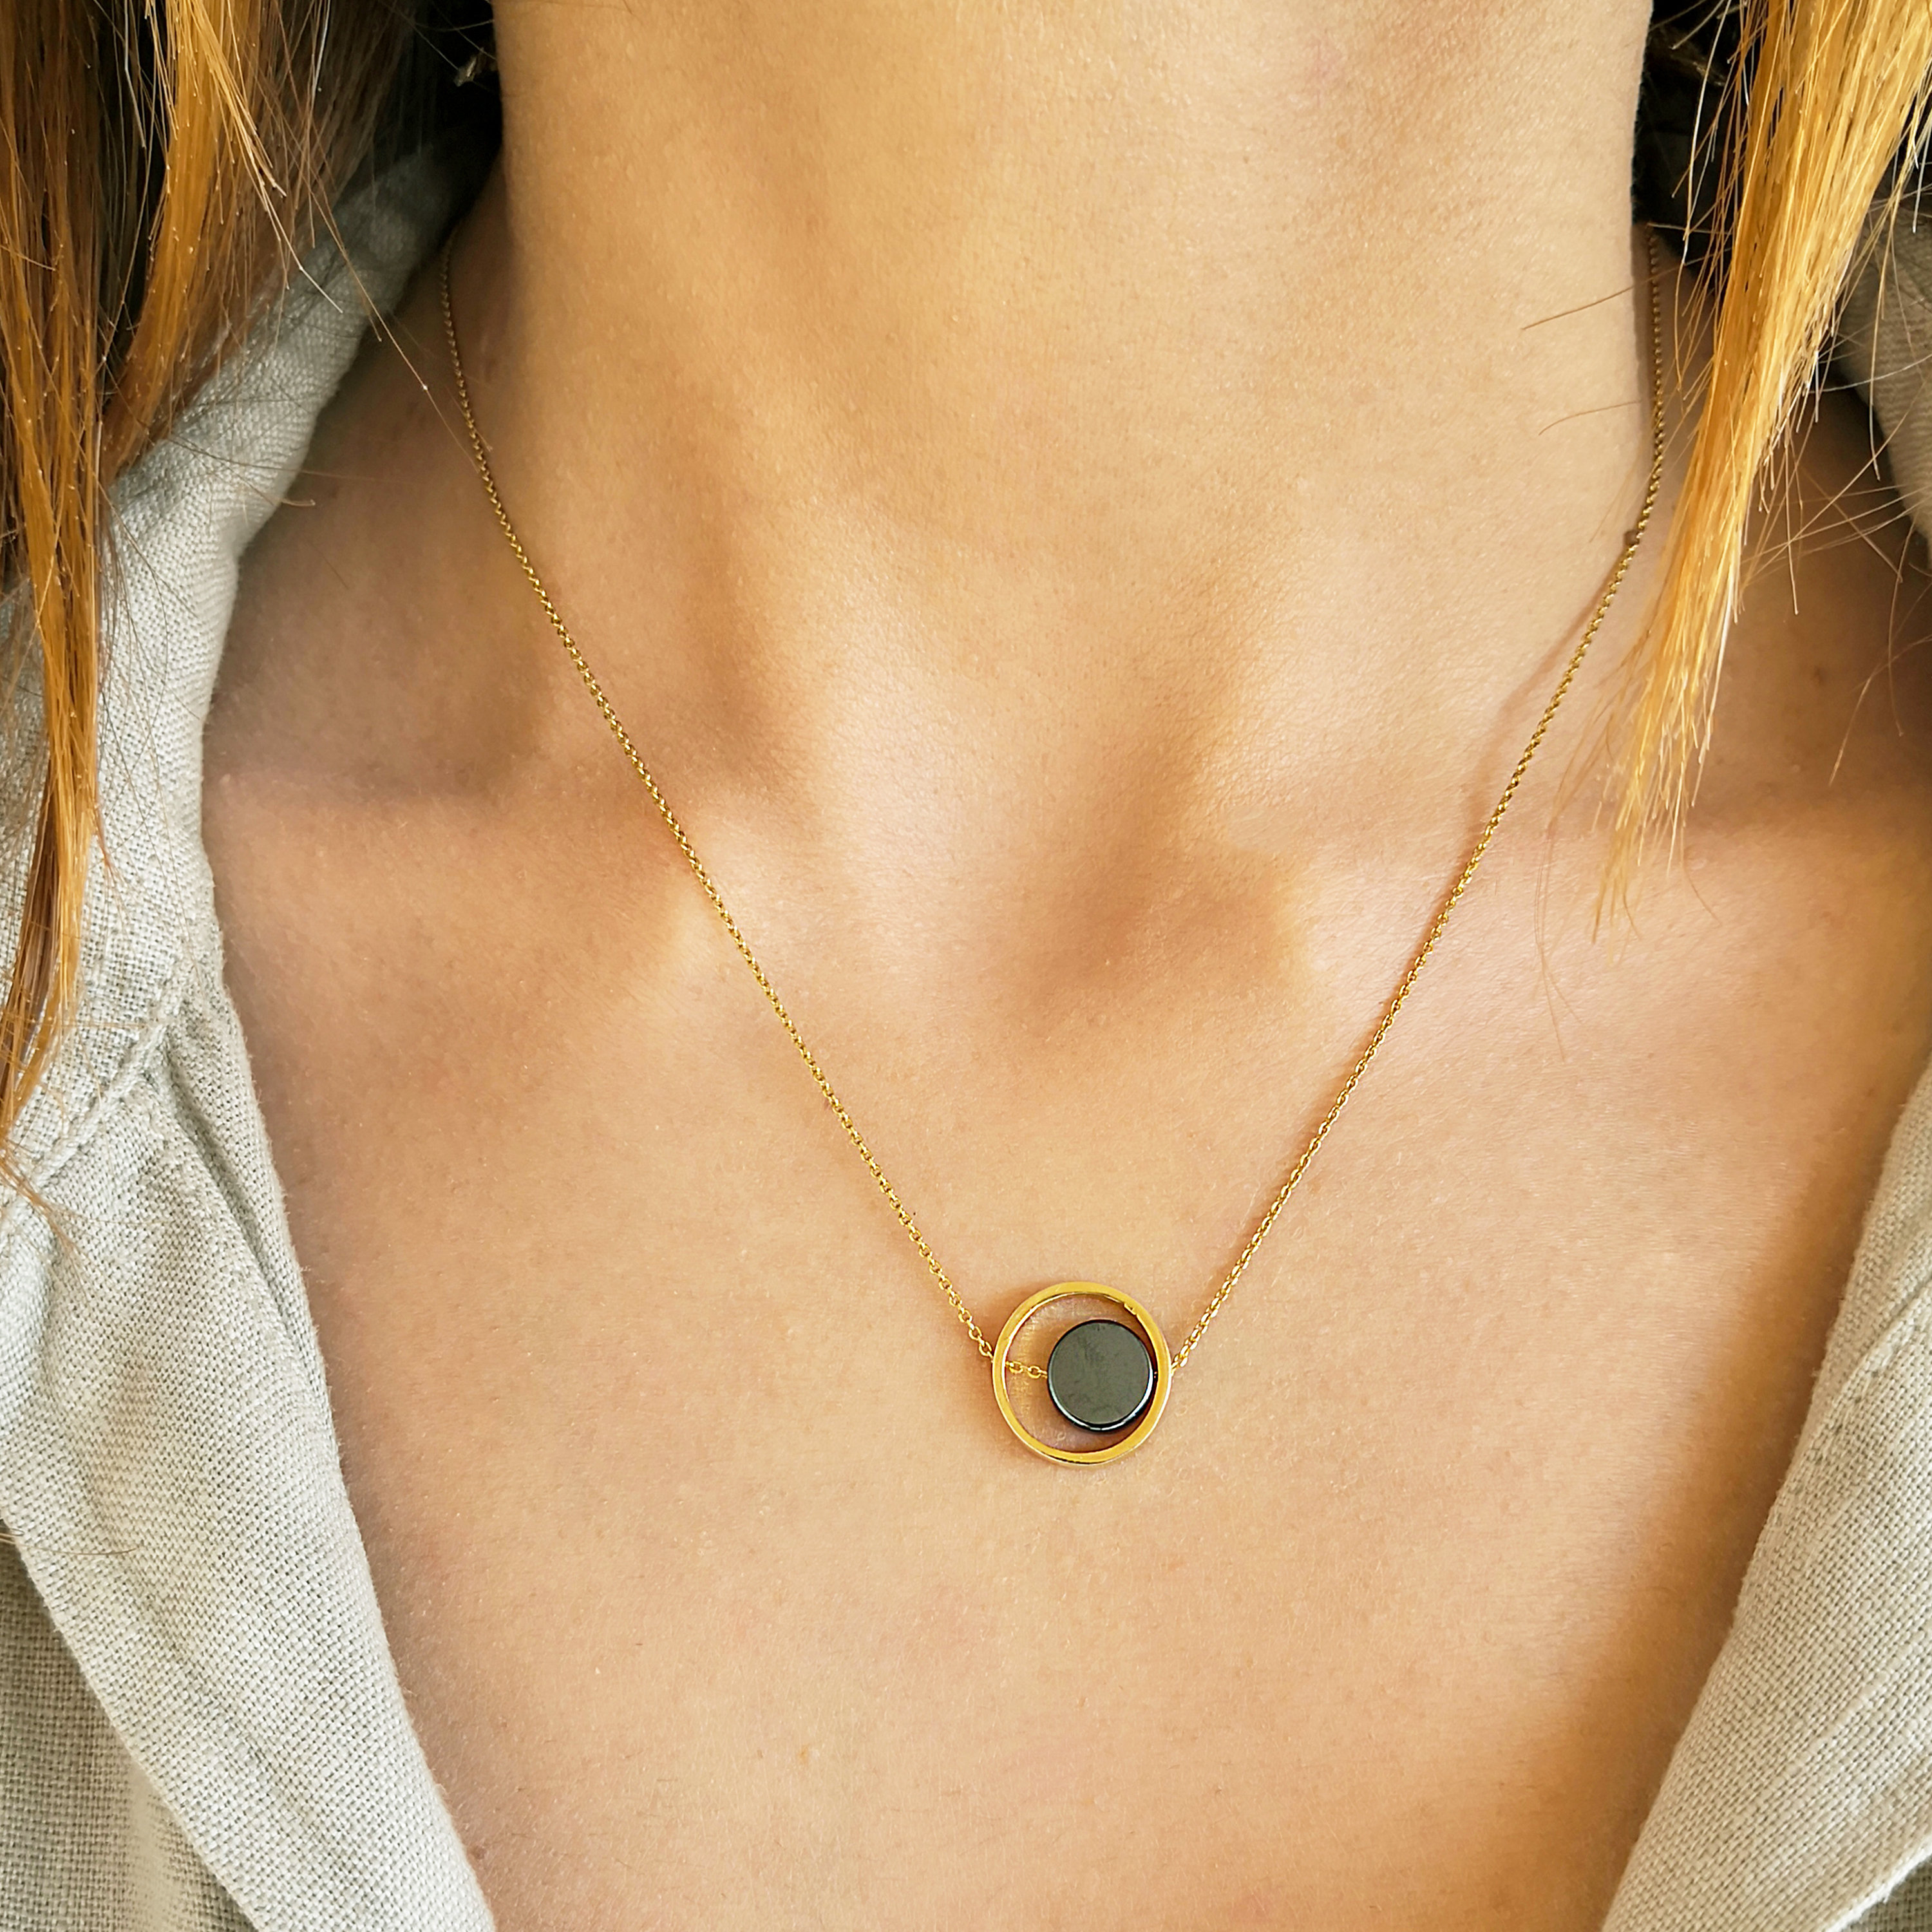 Stylish Stress Relieving Necklace